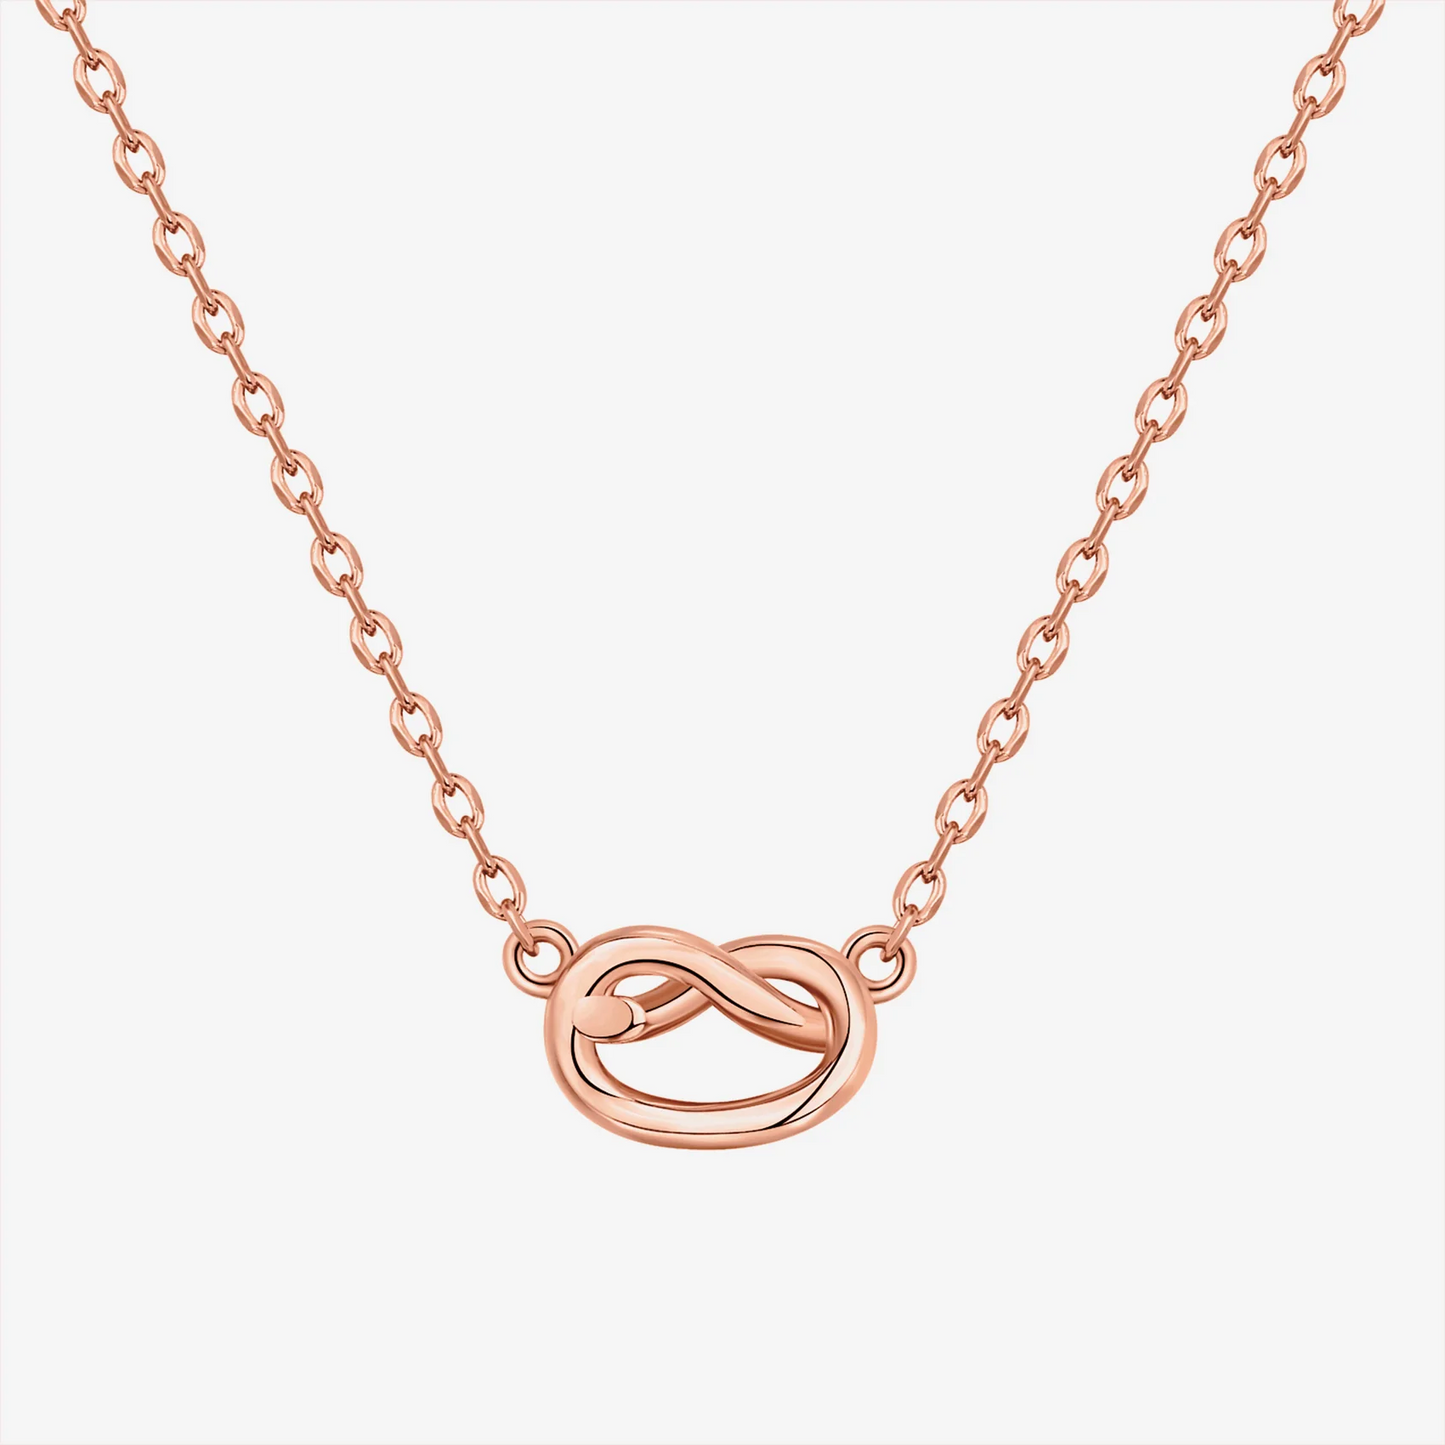 Love Knot Necklace Gift for Her